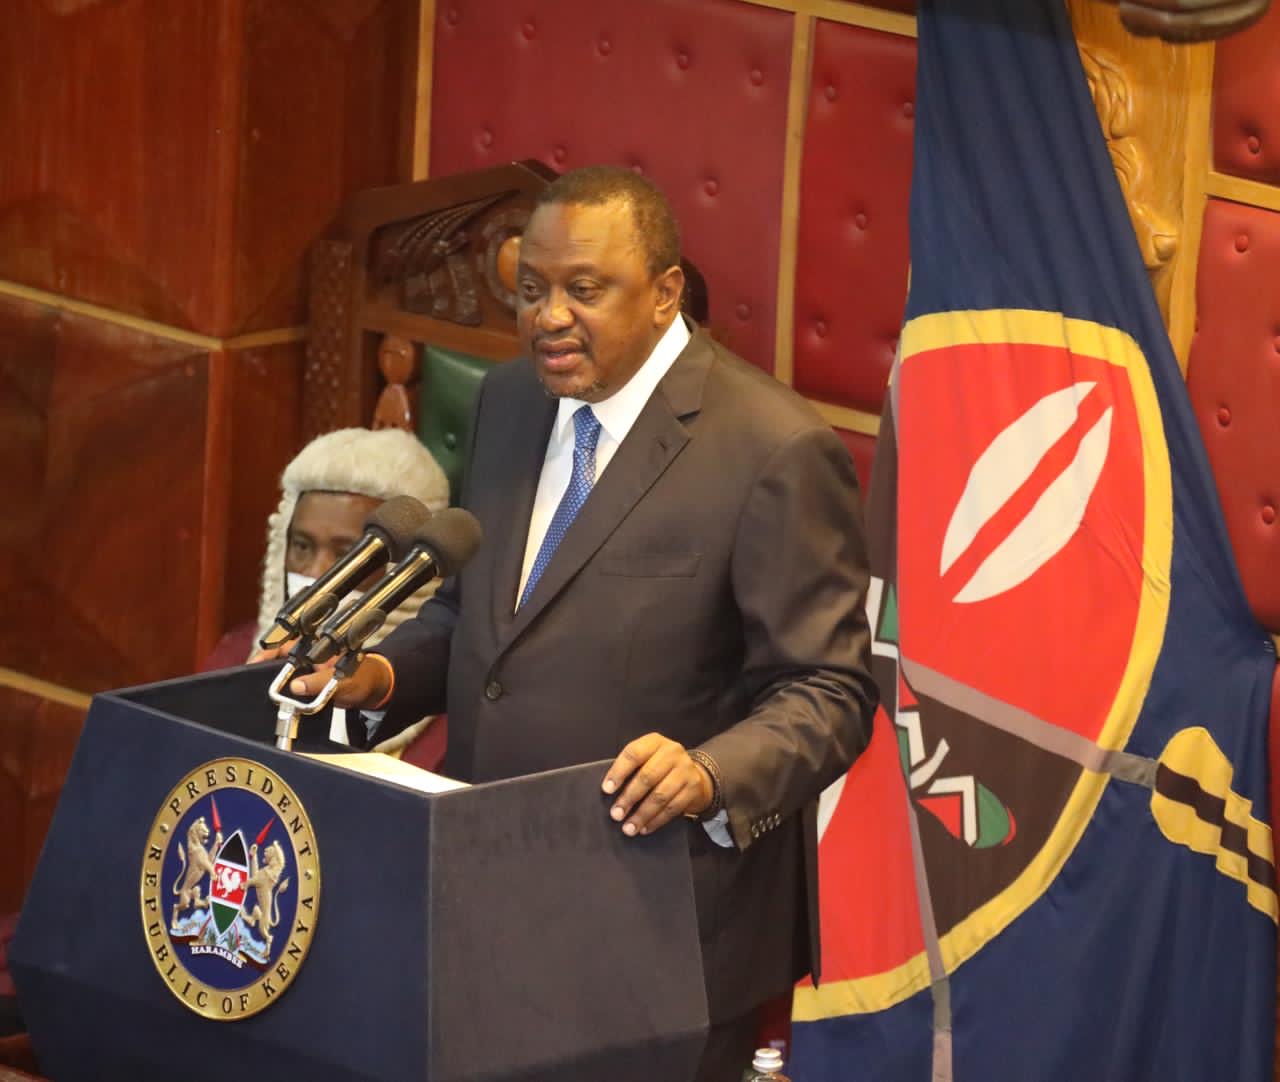 THE 7TH SPEECH ON STATE OF THE NATION ADDRESS BY H. E UHURU KENYATTA C.G.H THE PRESIDENT OF THE REPUBLIC OF KENYA, PARLIAMENT BUIDLINGS.